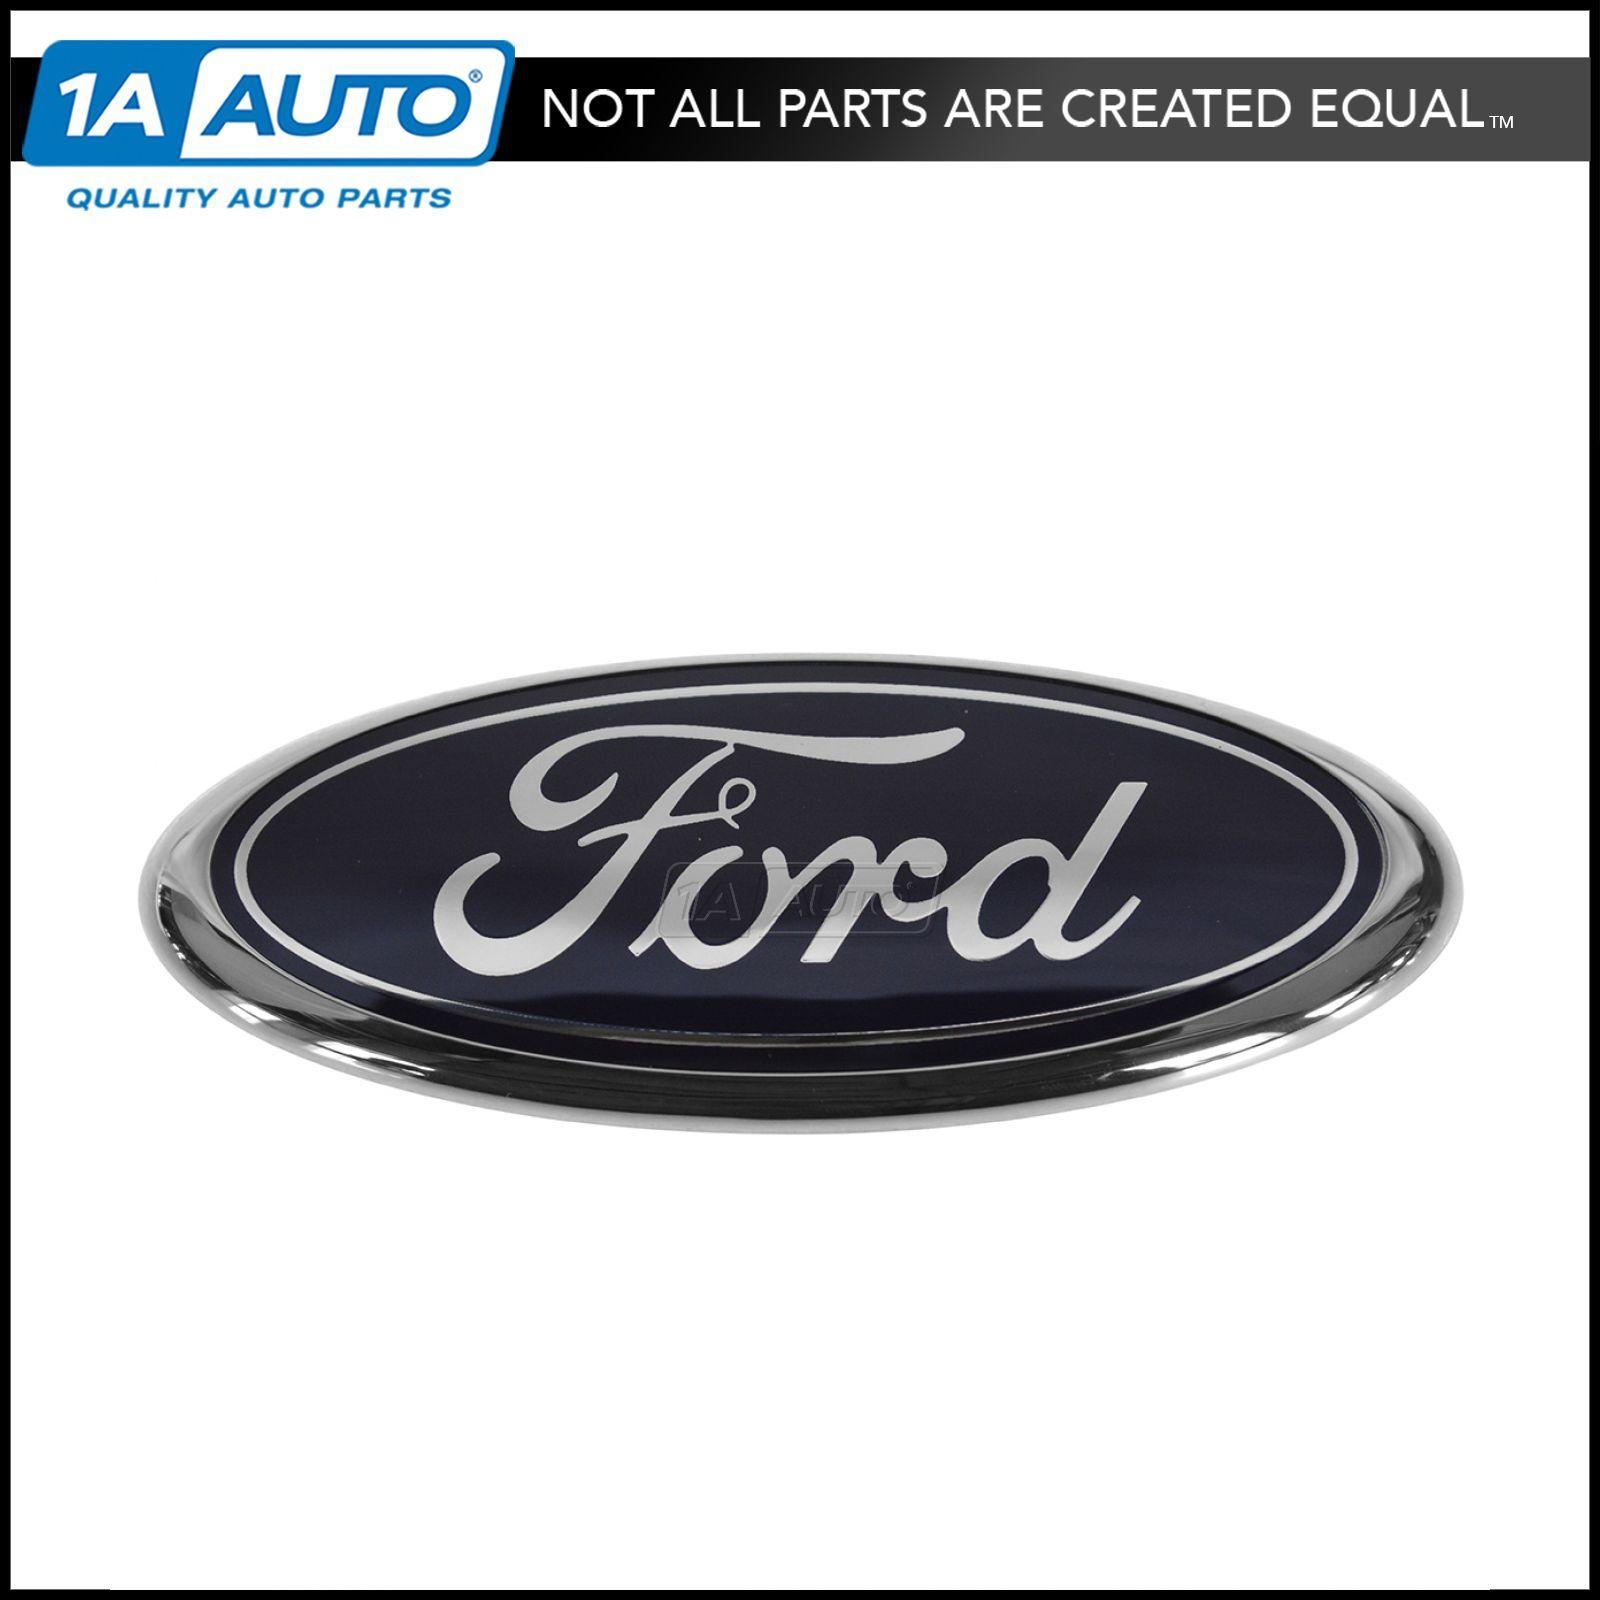 New Ford Truck Logo - New OEM Blue Oval Rear Tailgate Emblem Nameplate For Ford Truck Van ...